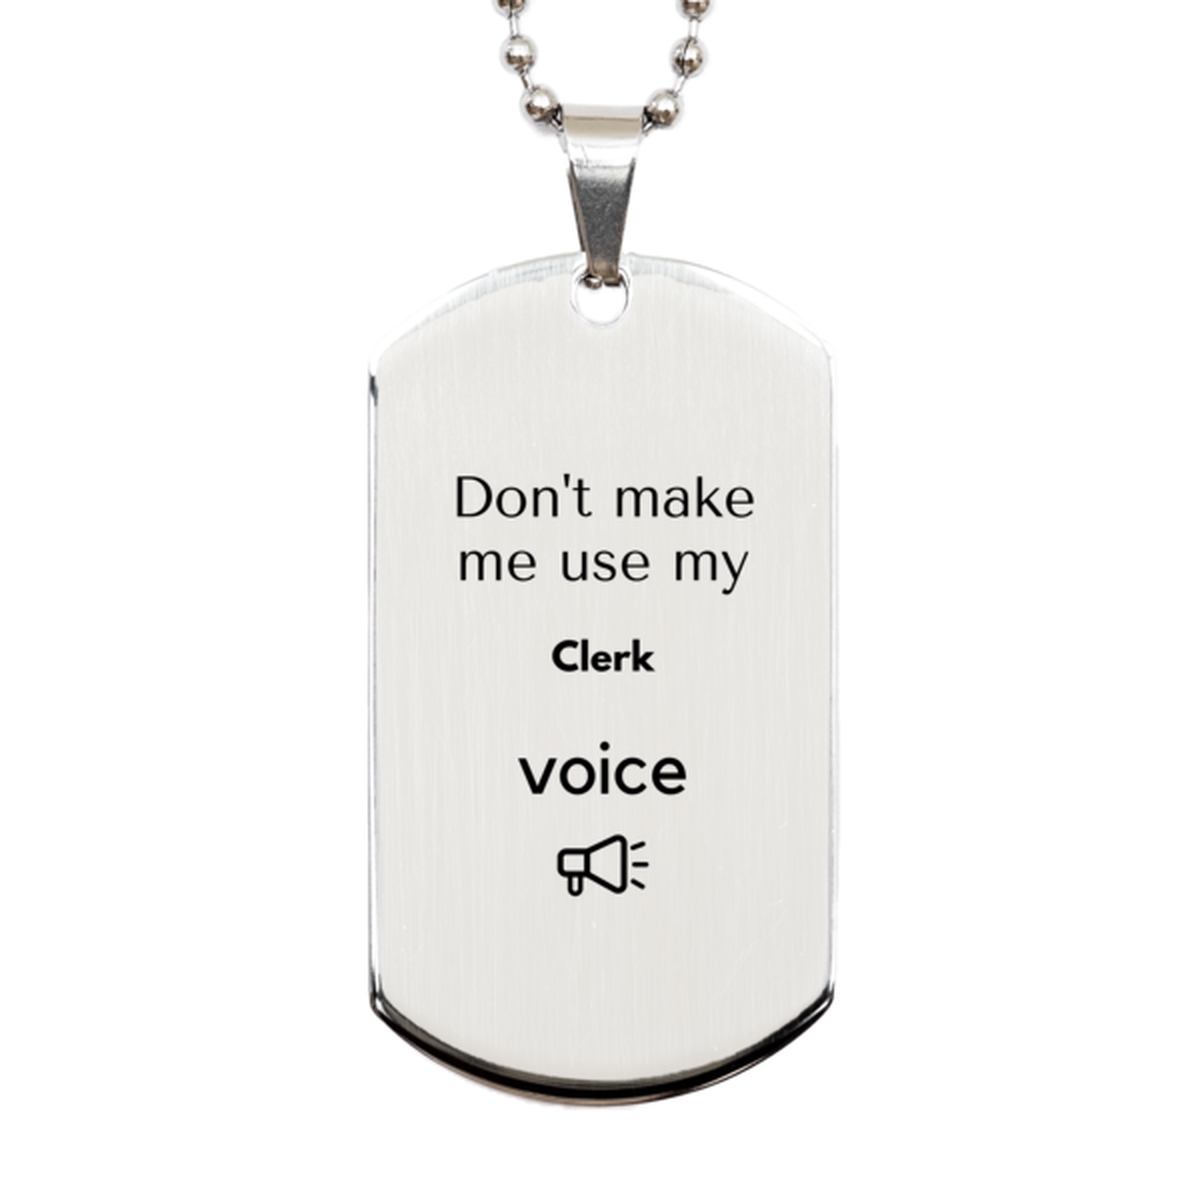 Don't make me use my Clerk voice, Sarcasm Clerk Gifts, Christmas Clerk Silver Dog Tag Birthday Unique Gifts For Clerk Coworkers, Men, Women, Colleague, Friends